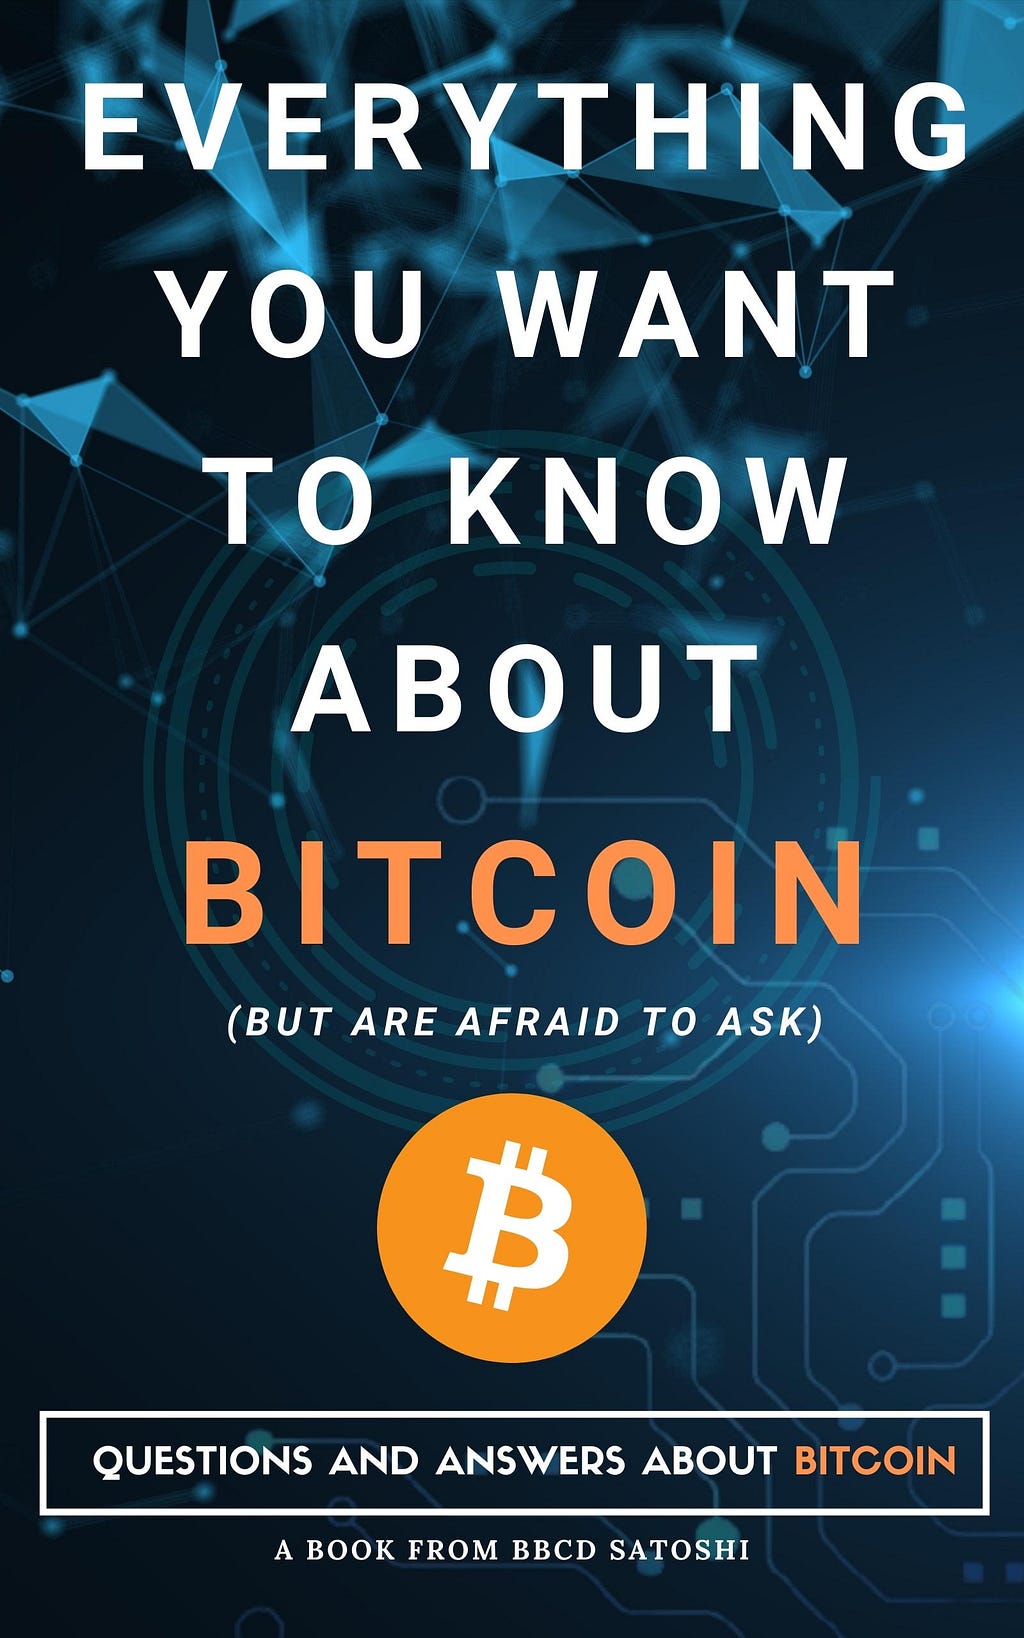 Everything You Want To Know About Bitcoin (book by BBCD Satoshi)